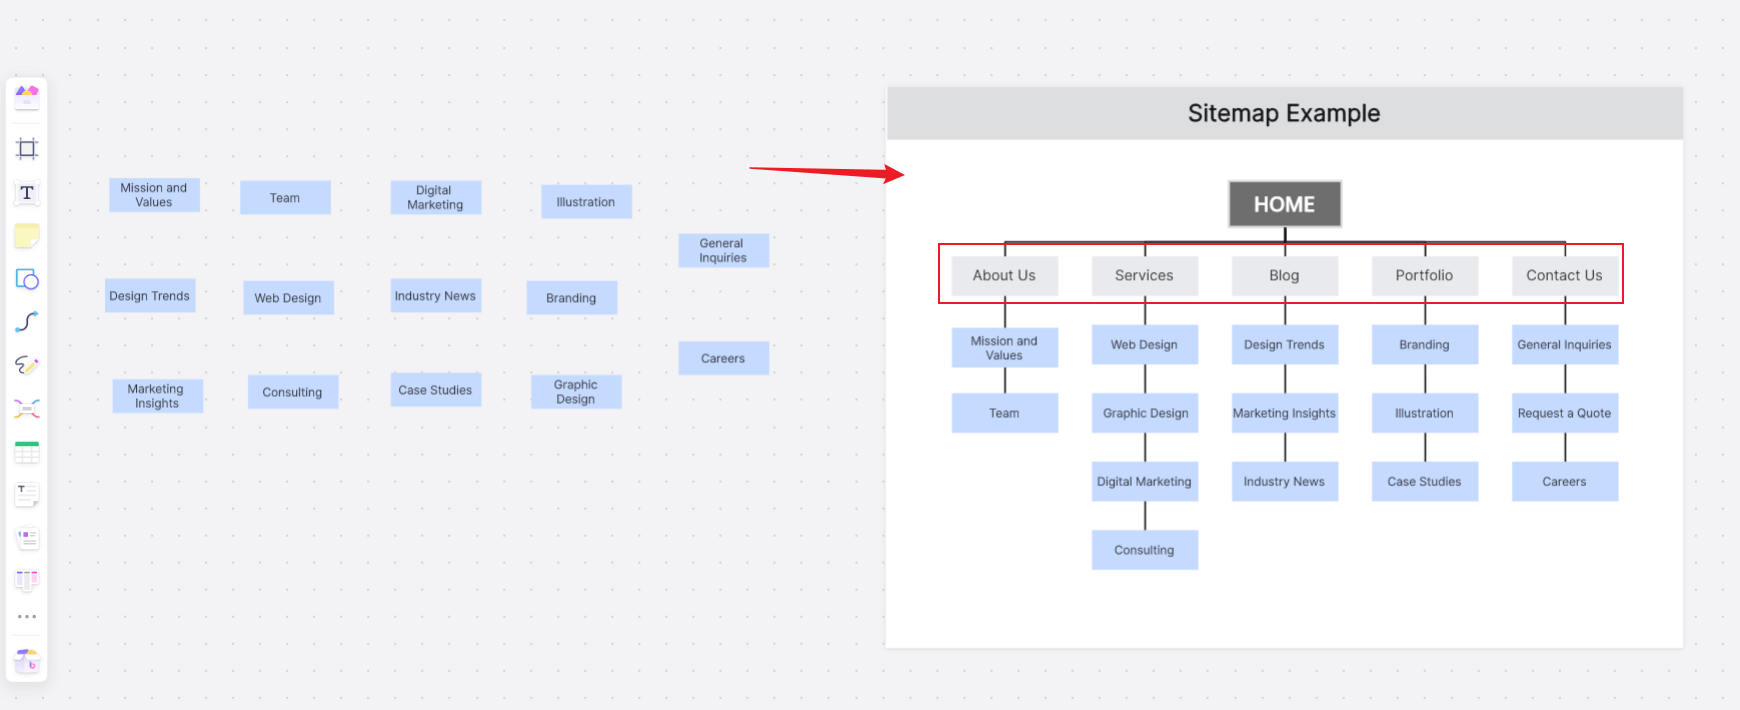 classsify-sitemap.png